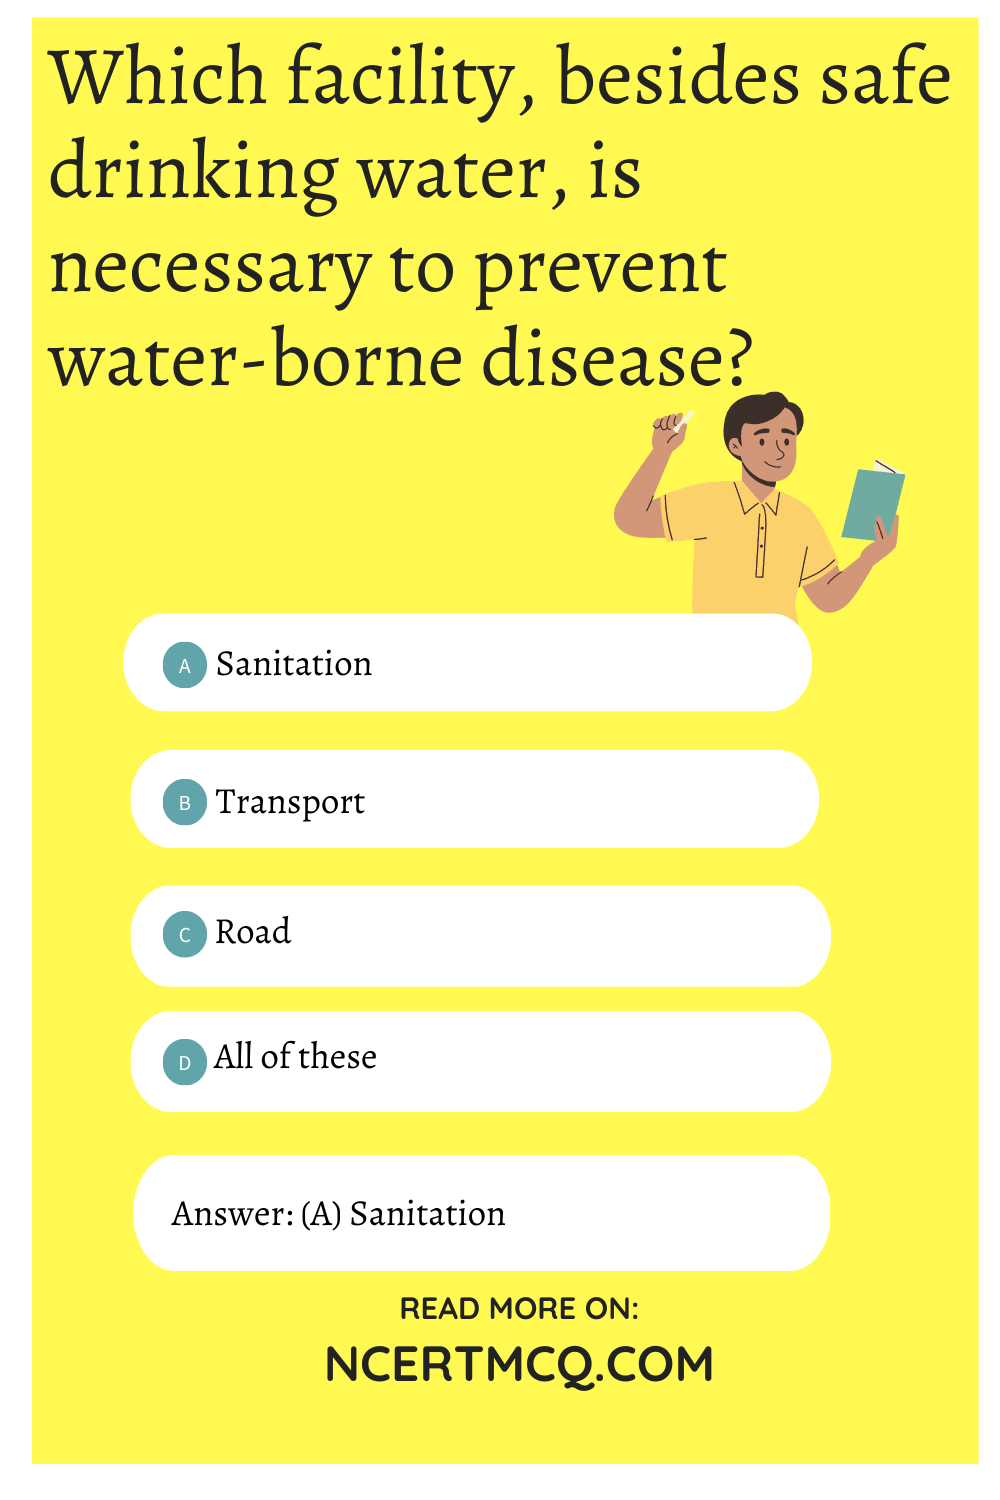 Which facility, besides safe drinking water, is necessary to prevent water-borne disease?